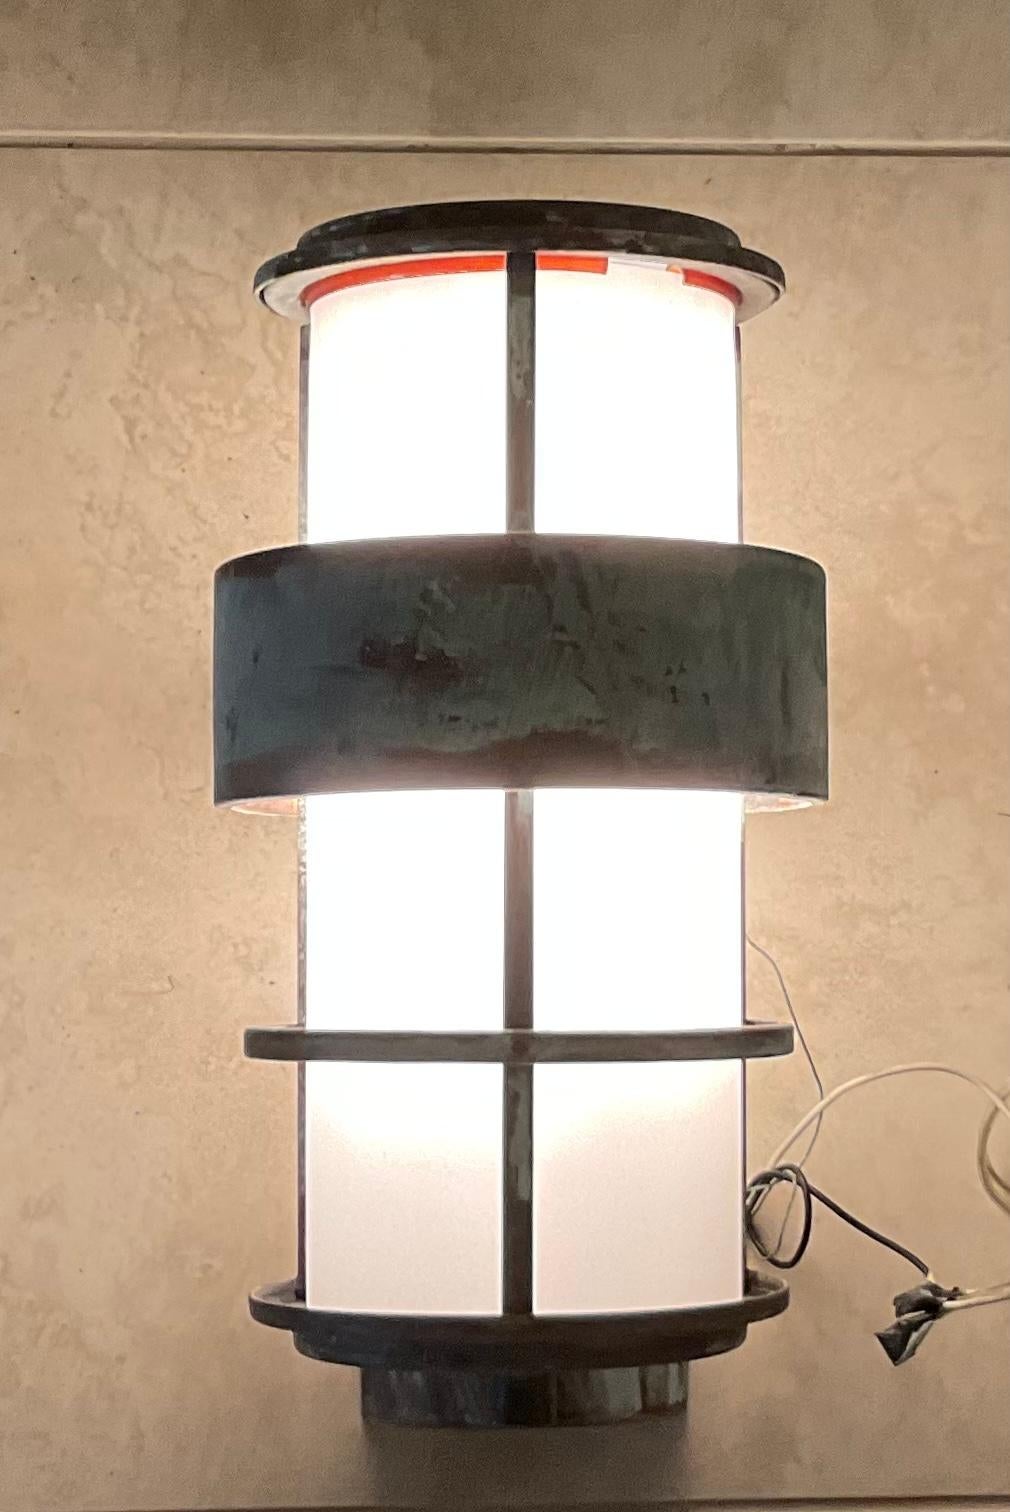 Single lantern or sconce made of solid brass frame with milk glass tube in the center reflecting 60/watt light each sconces.
Great decorative modern light for indoor or outdoor int the front of the house.